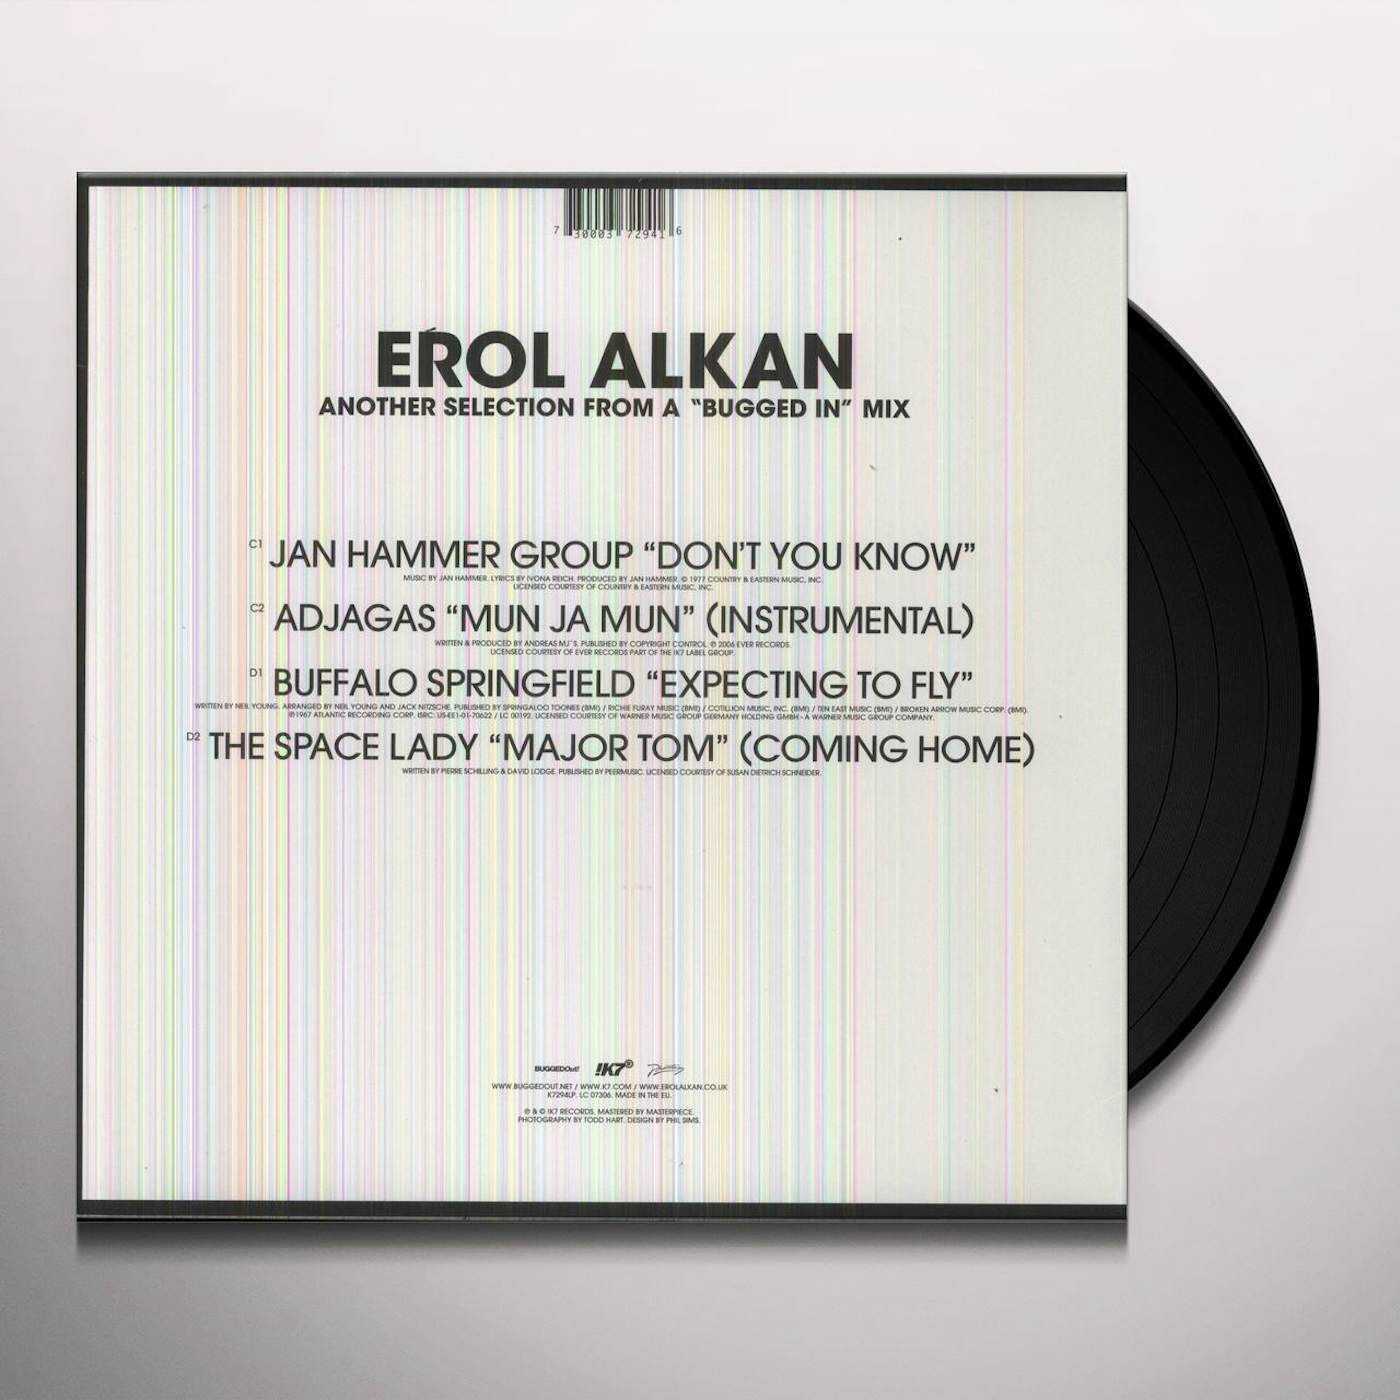 Erol Alkan ANOTHER BUGGED OUT MIX & BUGGED IN SELECTION Vinyl Record